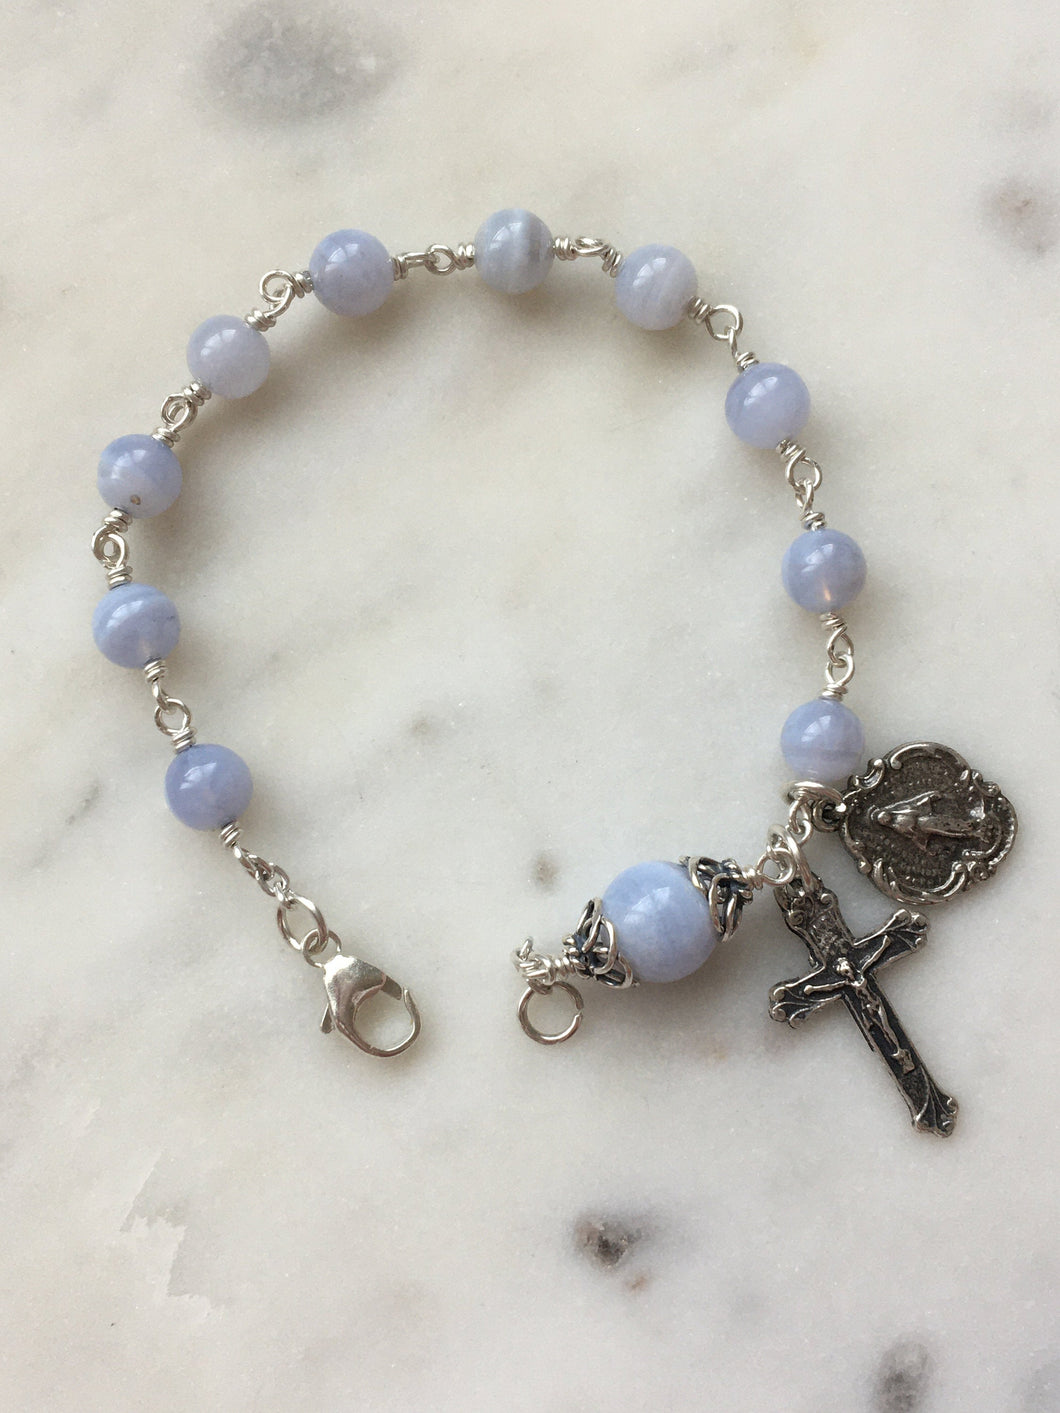 Blue Lace Agate Rosary Bracelet - All Sterling - Wire-wrapped